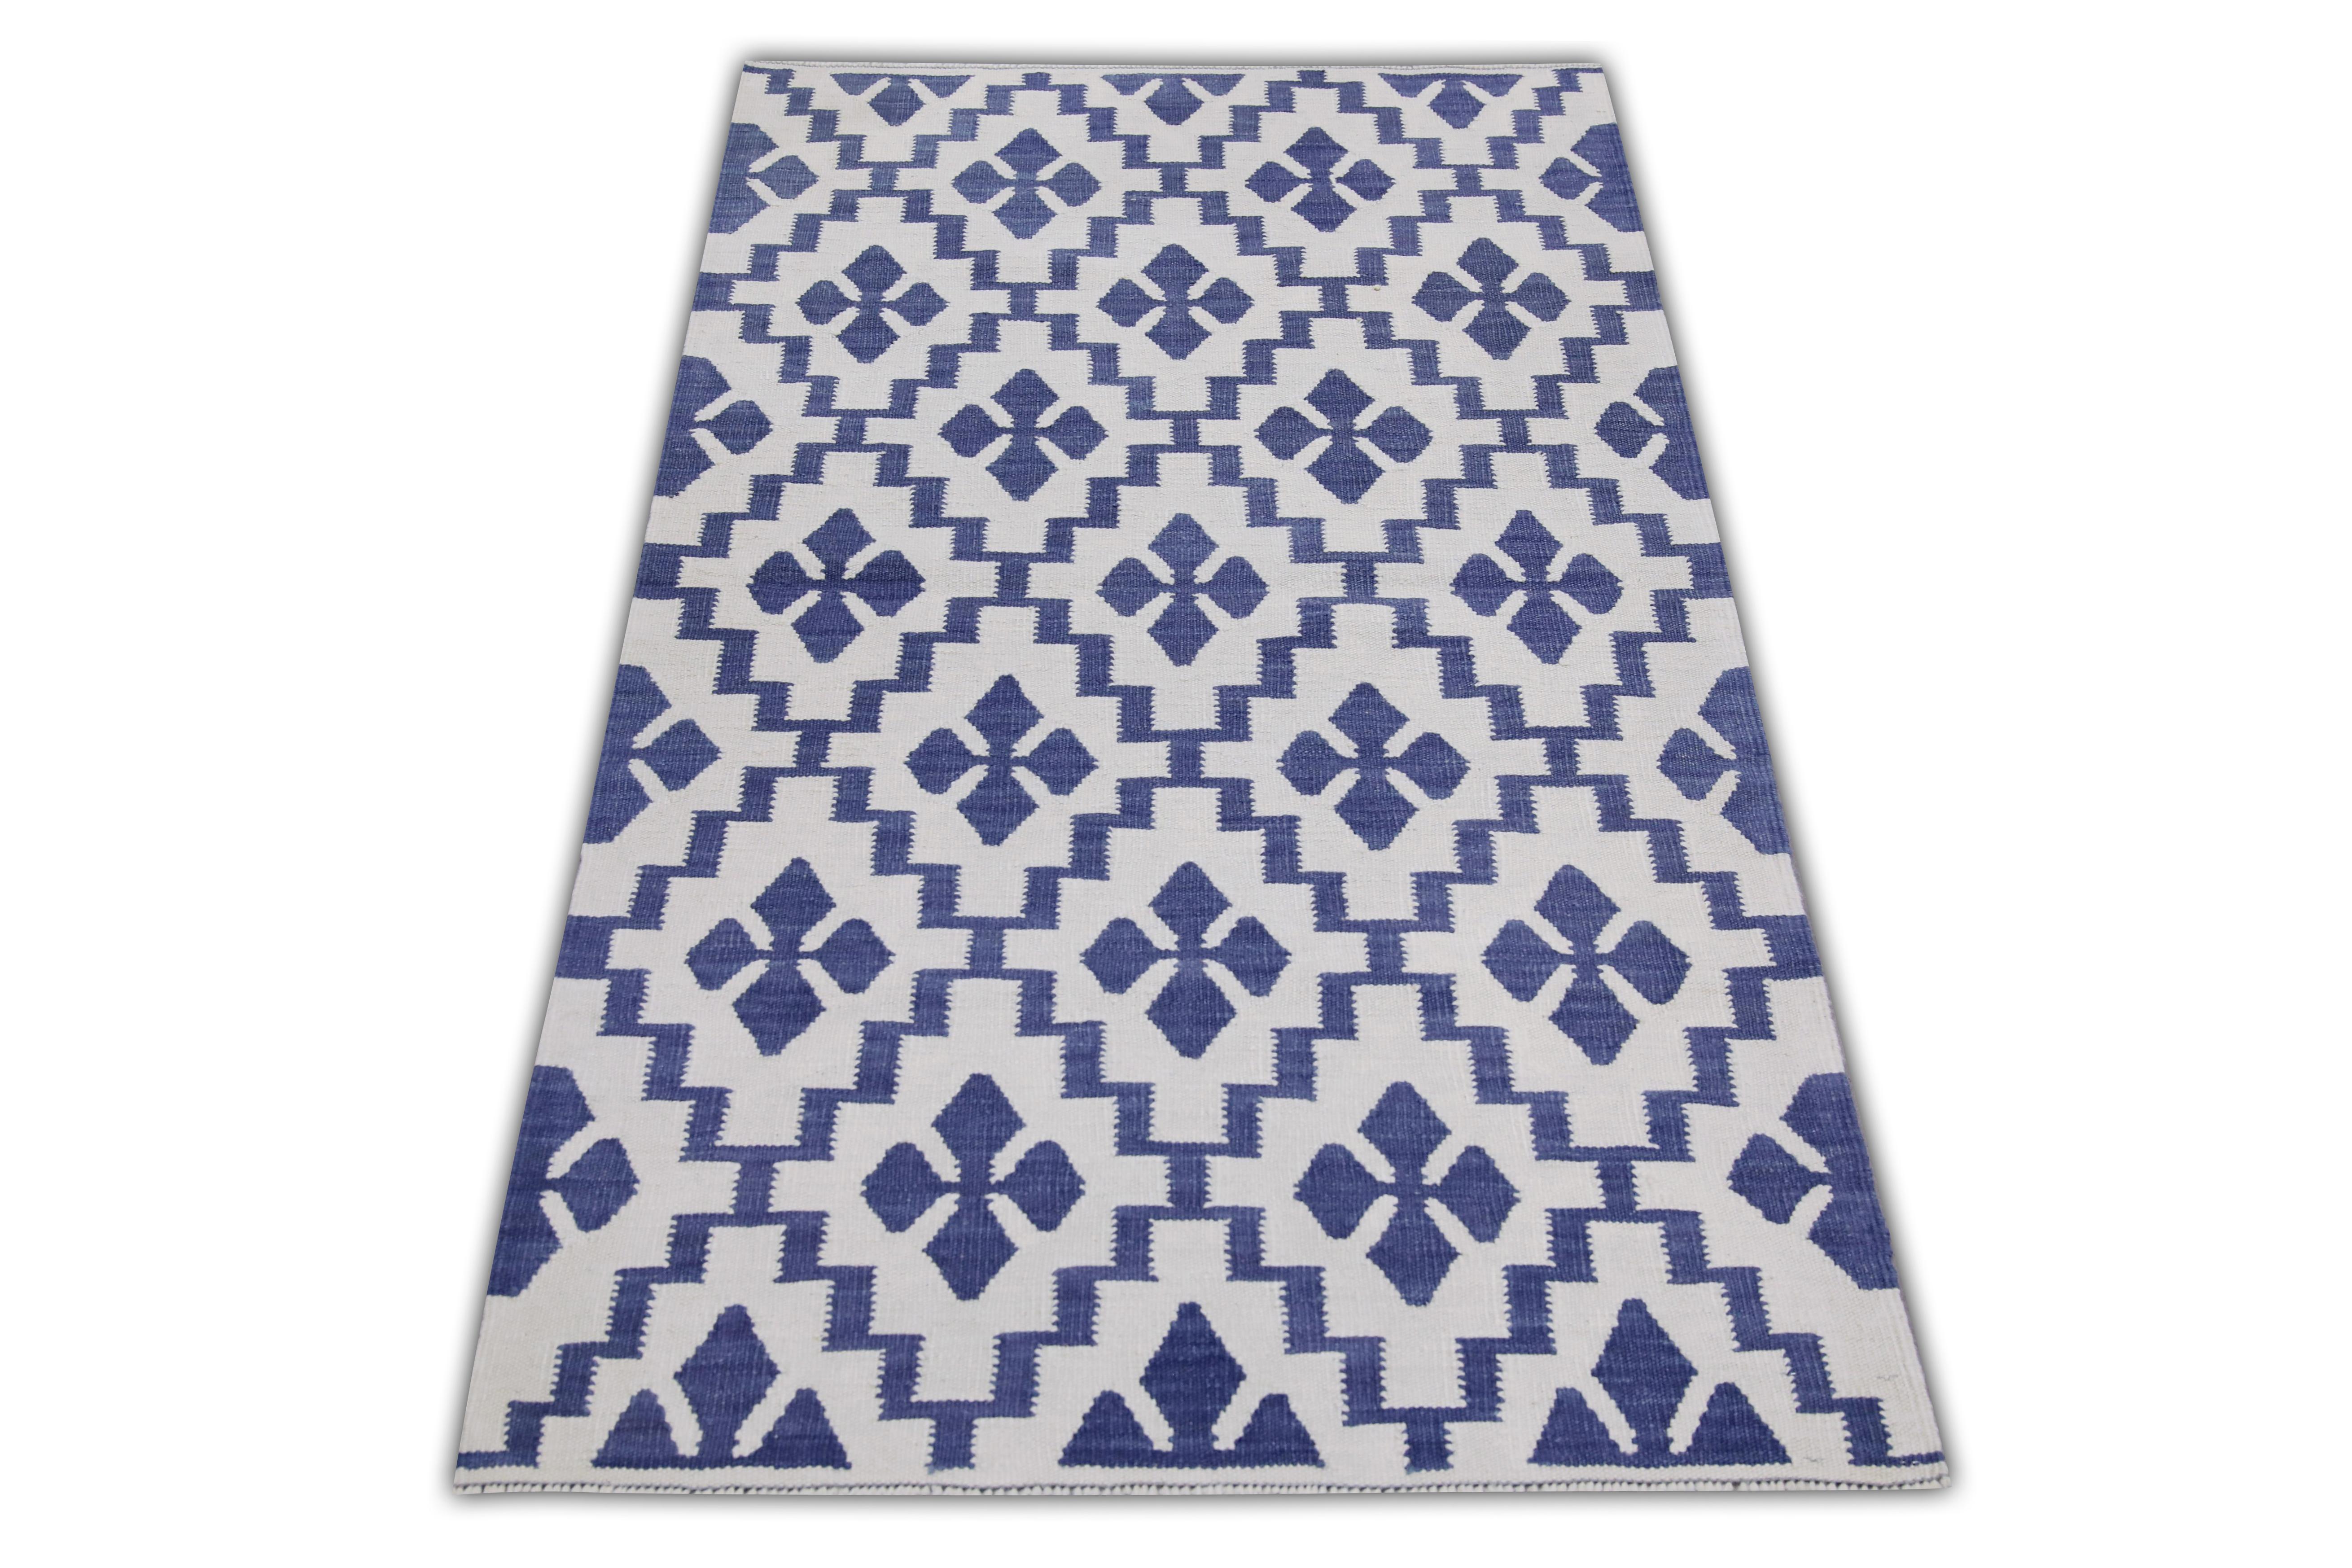 This exquisite Turkish flatweave kilim rug is a stunning masterpiece of traditional craftsmanship. Each rug is meticulously handwoven by skilled artisans using age-old techniques that have been passed down through generations. The intricate design